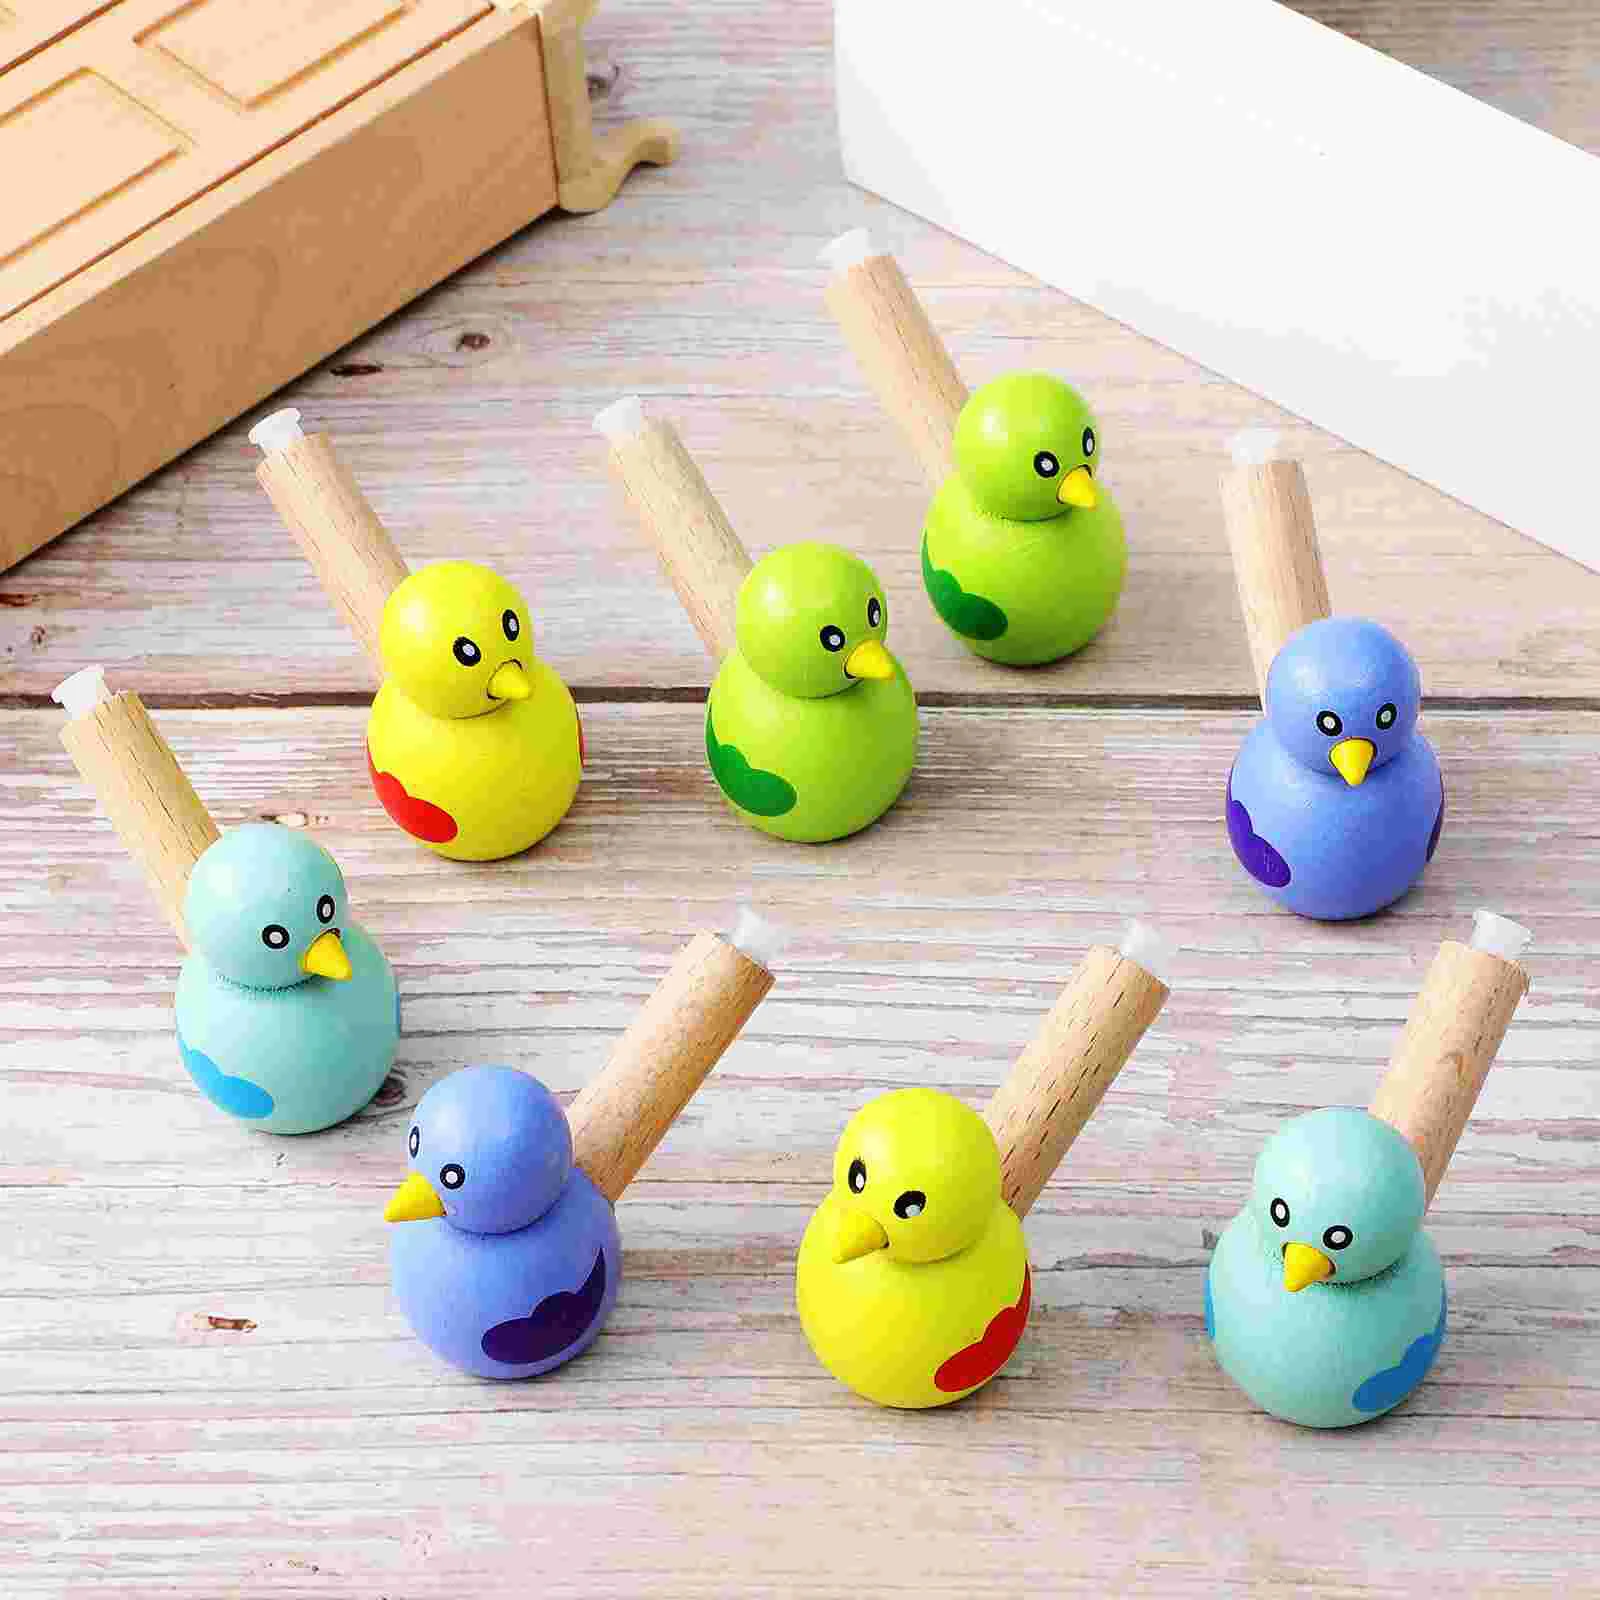 

8 Pcs Cartoon Bird Whistles for Kids Toddlers Children Wooden Whistles Music Instrument Educational Toys